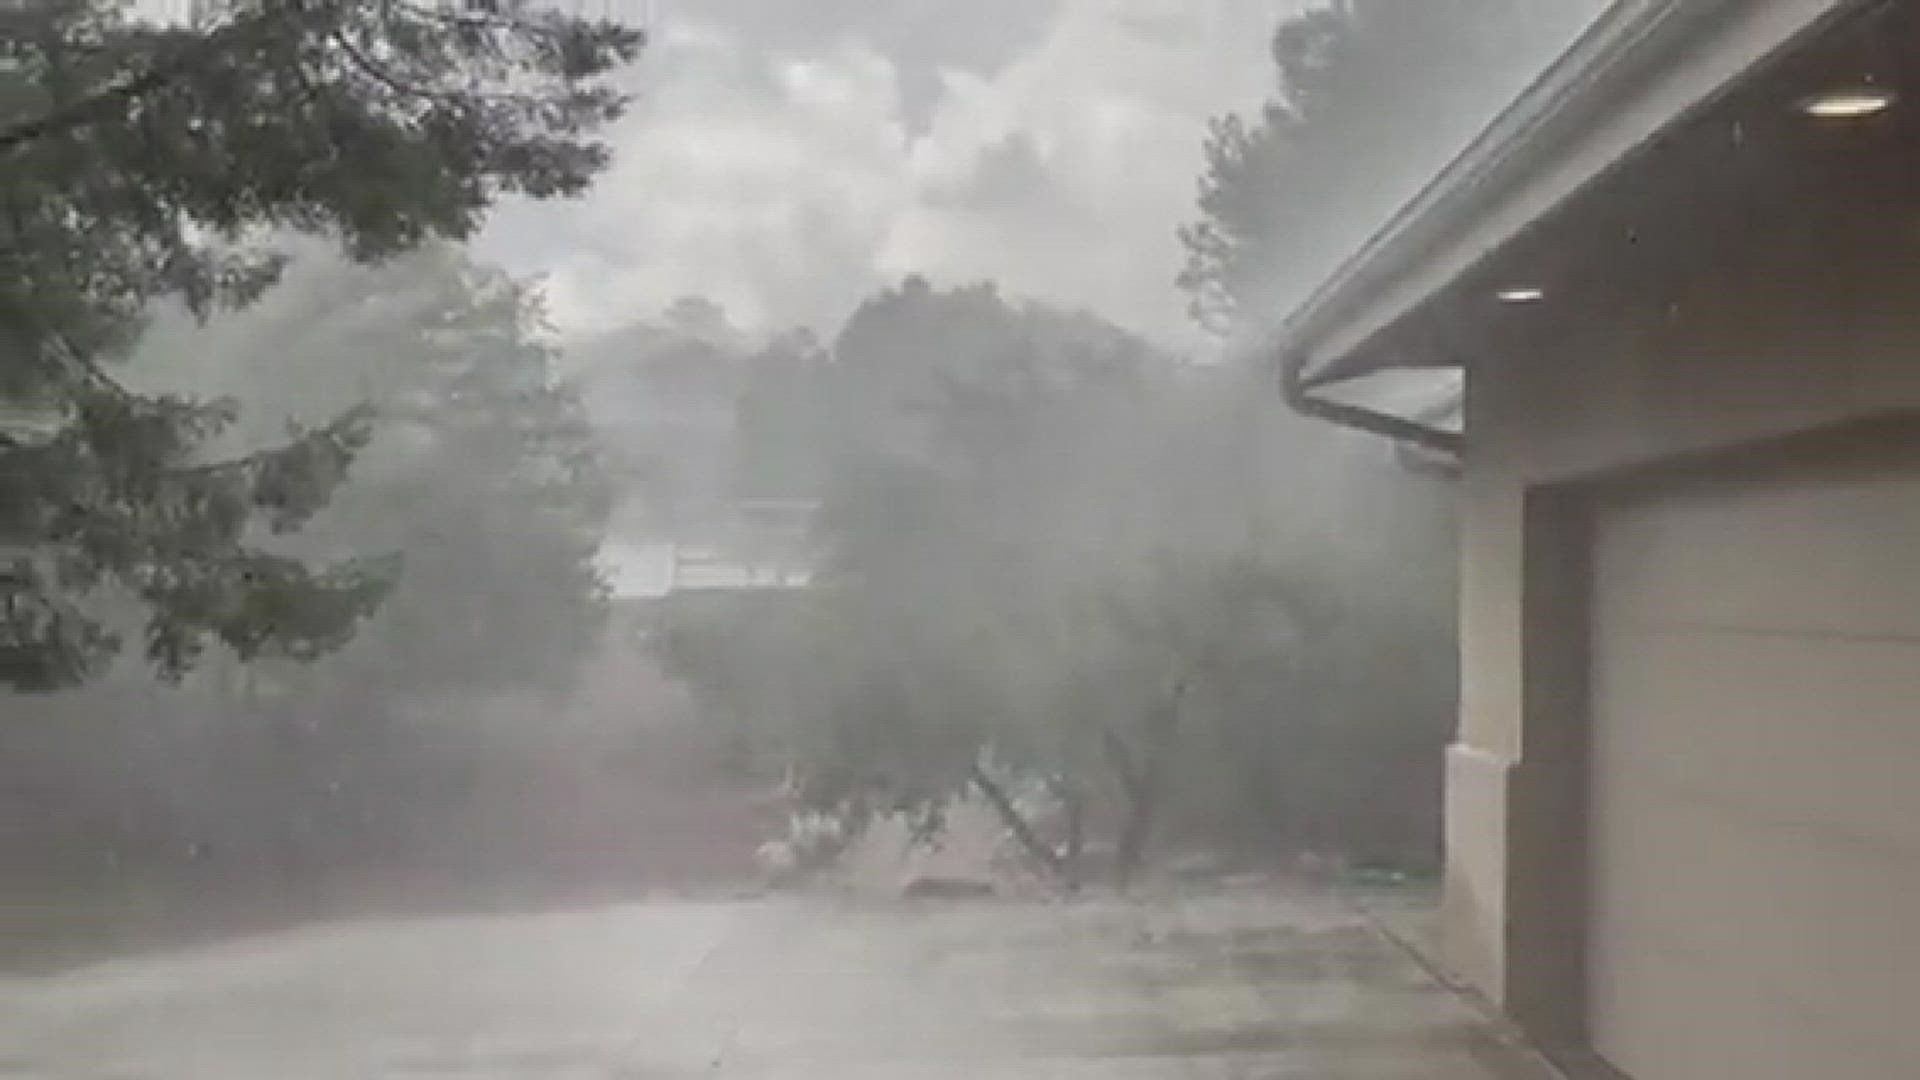 Flash water streams, lightning and thunder! Video at 10:55 am in Prescott
Credit: Gregory Schmauss